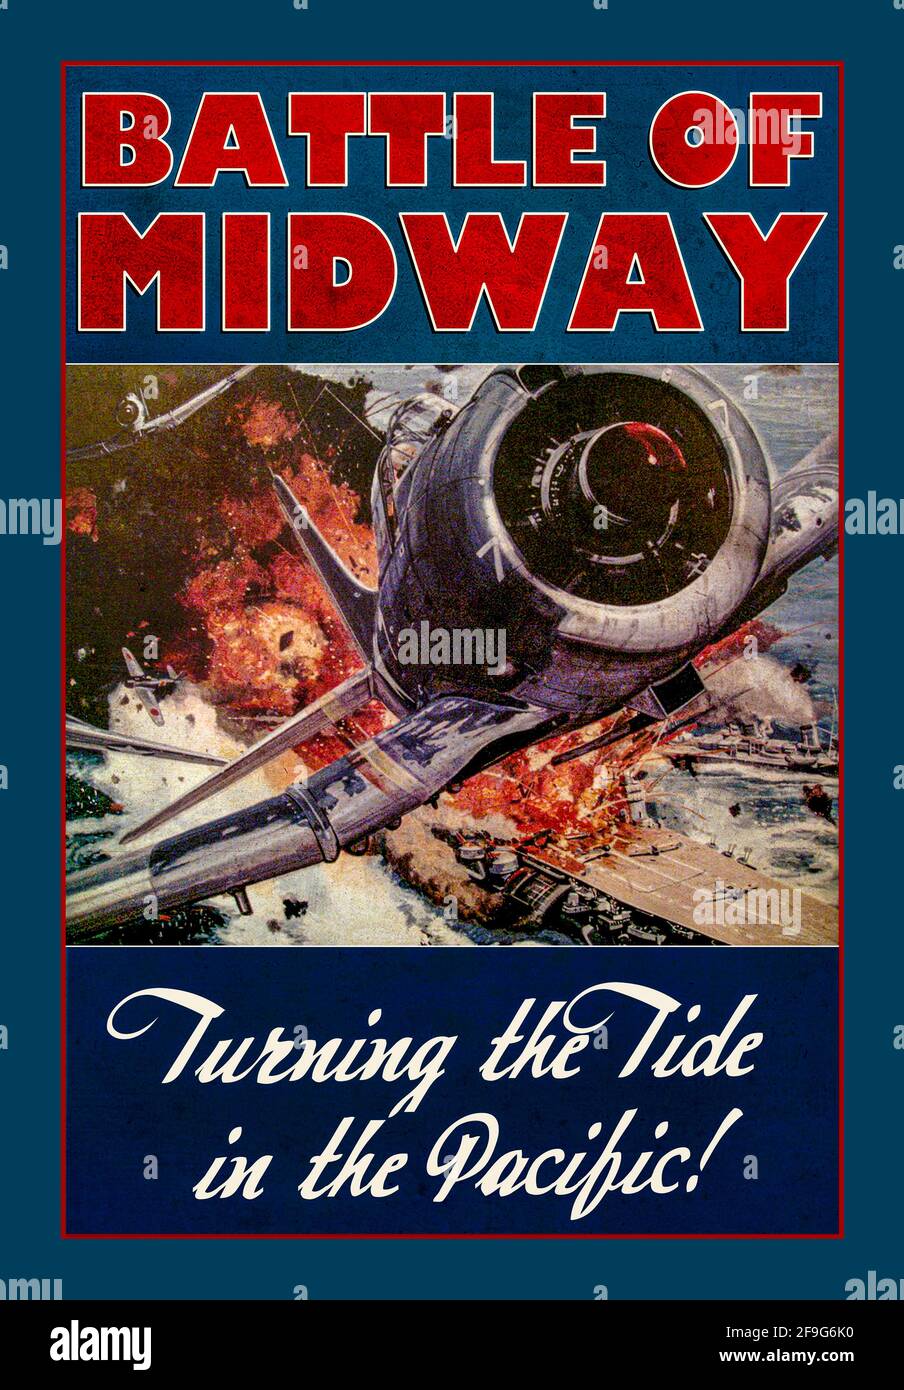 WW2 USA  Propaganda Poster illustrating Battle of Midway 'Turning the tide in the Pacific' Americas war with Japan. The Battle of Midway was a major naval battle in the Pacific Theater of World War II that took place on 4–7 June 1942, six months after Japan's attack on Pearl Harbor and one month after the Battle of the Coral Sea. Stock Photo